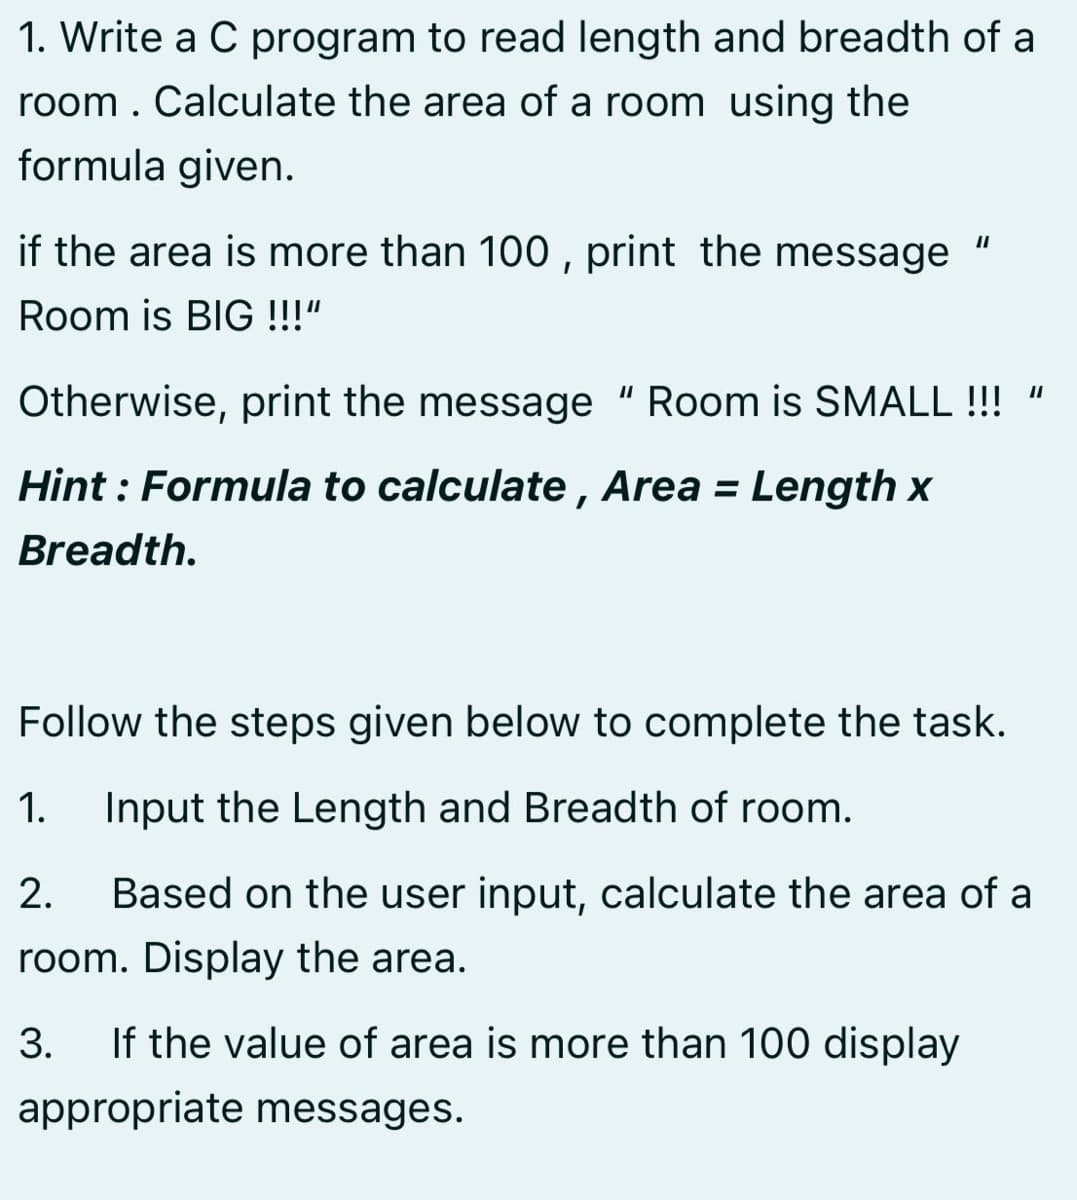 1. Write a C program to read length and breadth of a
room. Calculate the area of a room using the
formula given.
if the area is more than 100 , print the message
II
Room is BIG !!!"
Otherwise, print the message "Room is SMALL !!! "
Hint : Formula to calculate , Area = Length x
Breadth.
Follow the steps given below to complete the task.
1.
Input the Length and Breadth of room.
2.
Based on the user input, calculate the area of a
room. Display the area.
3.
If the value of area is more than 100 display
appropriate messages.
